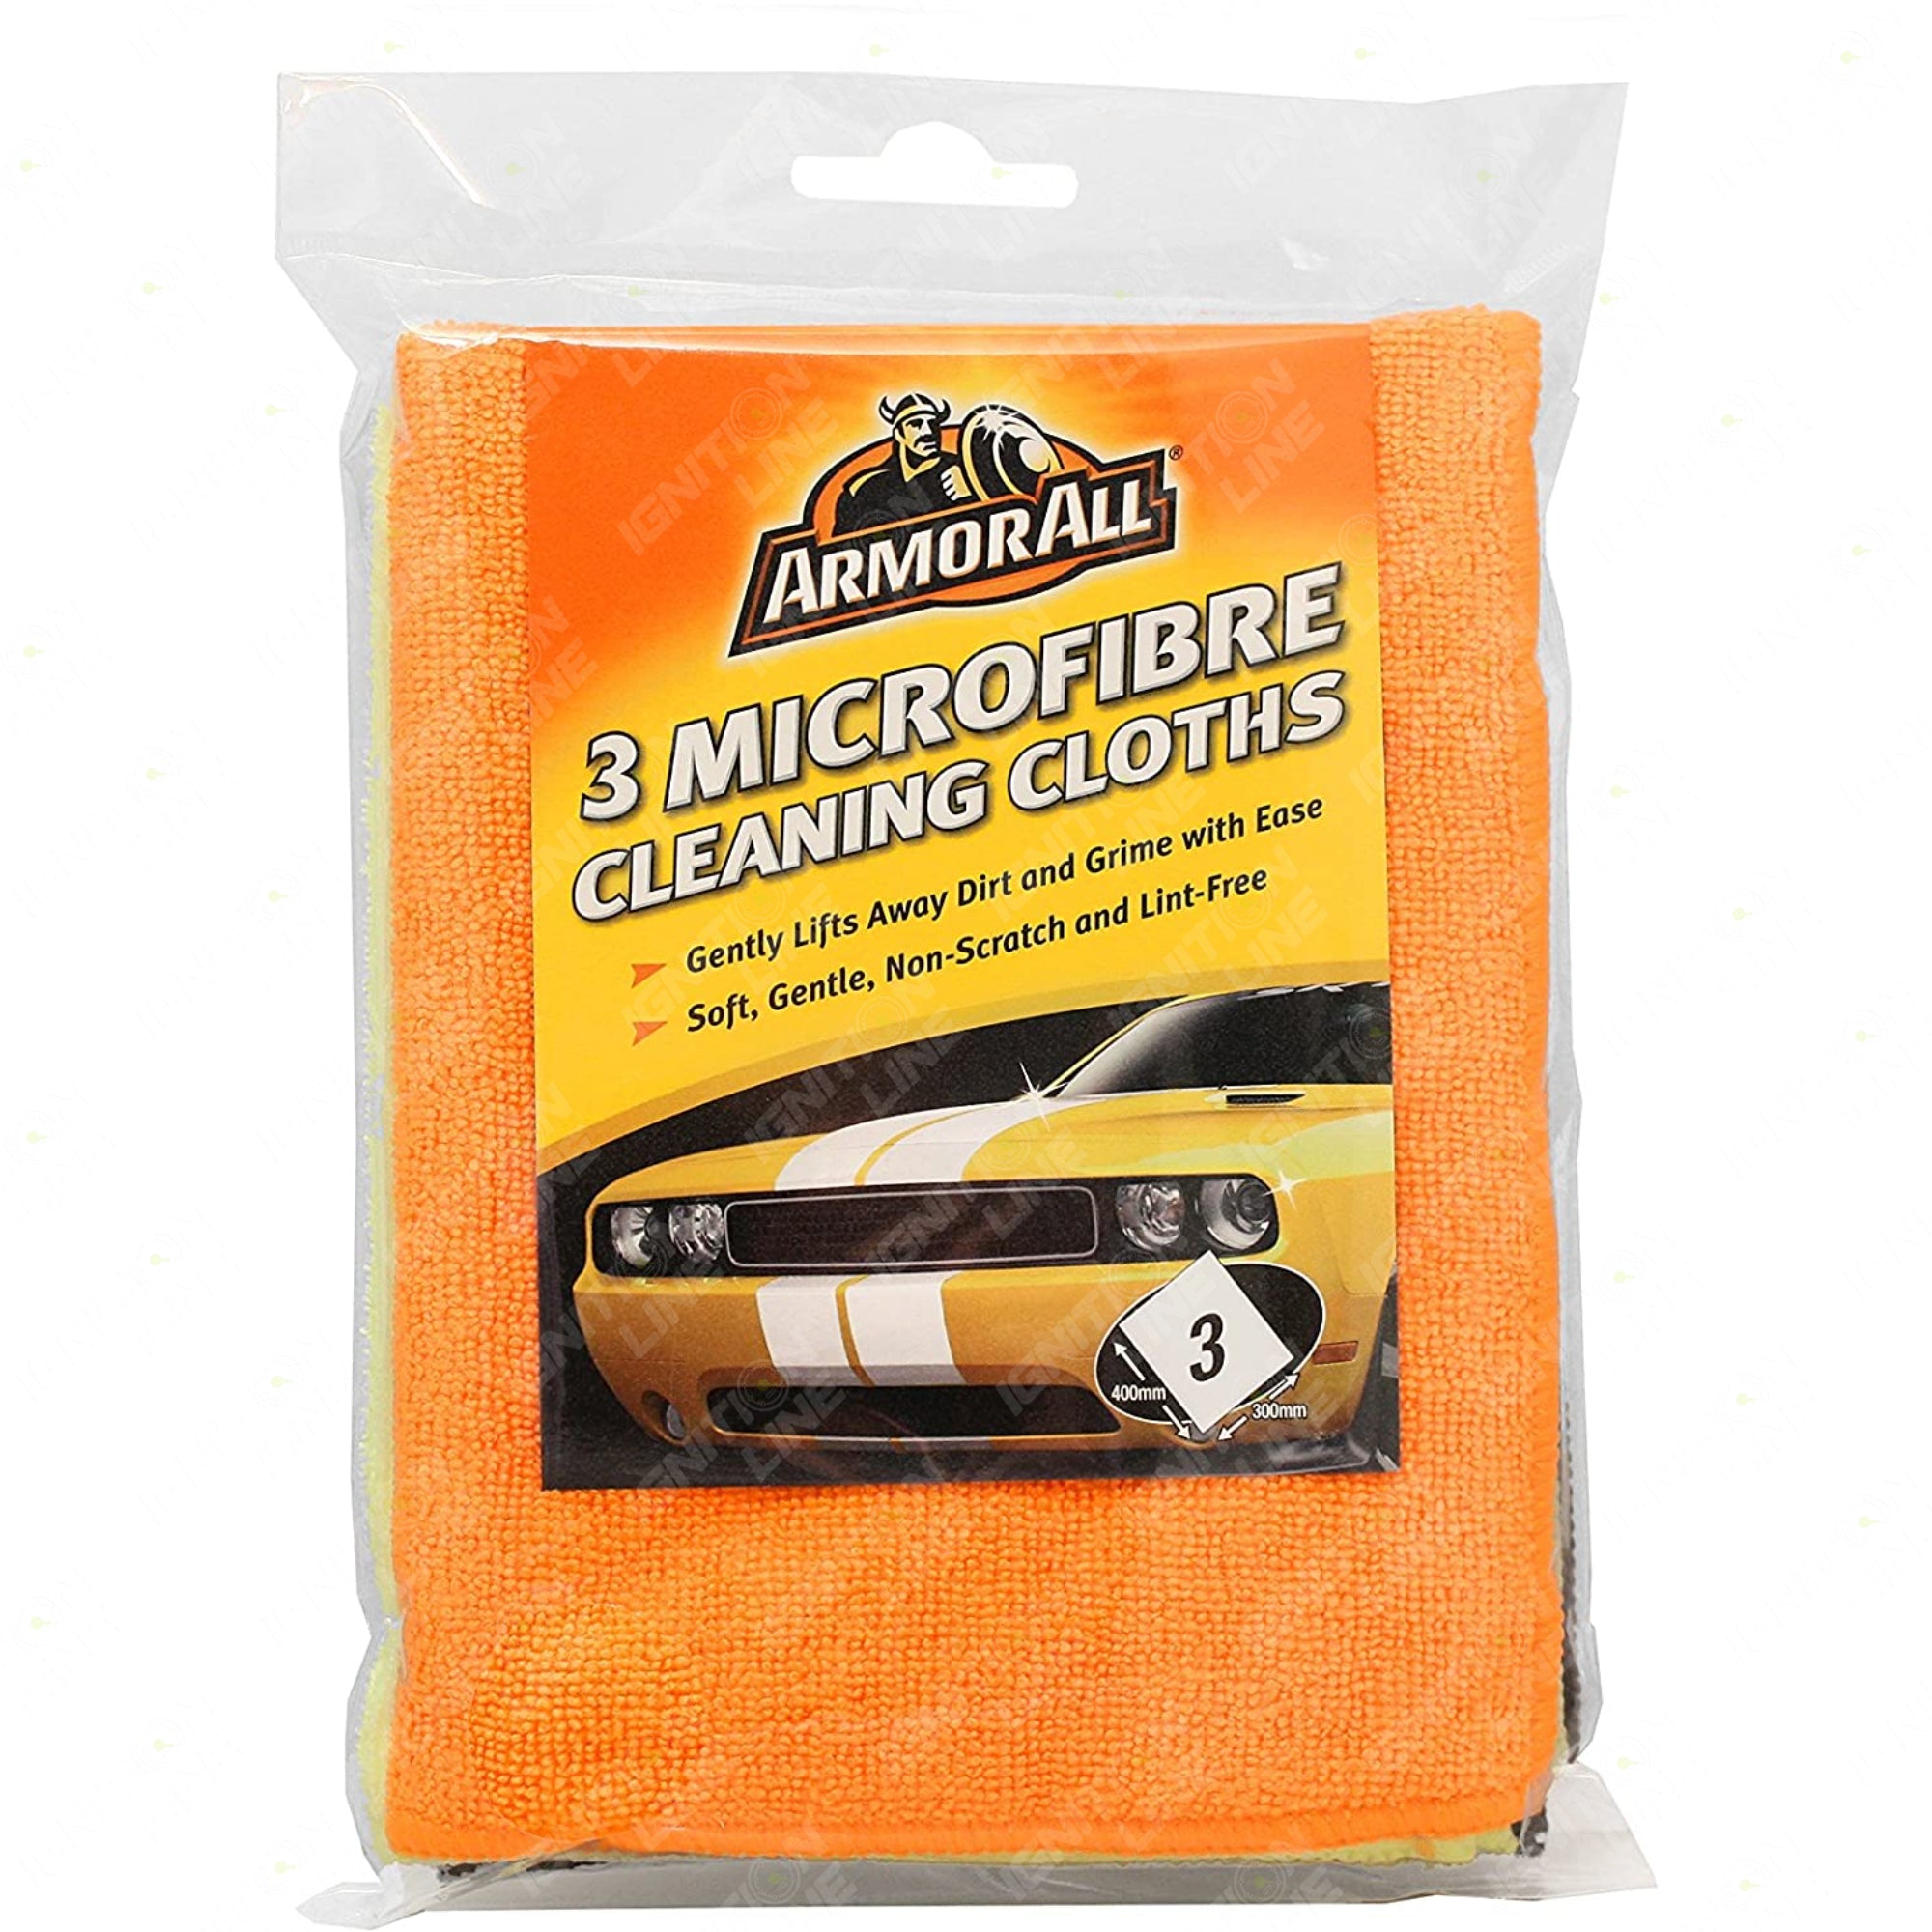 3 Microfibre Cleaning Cloths